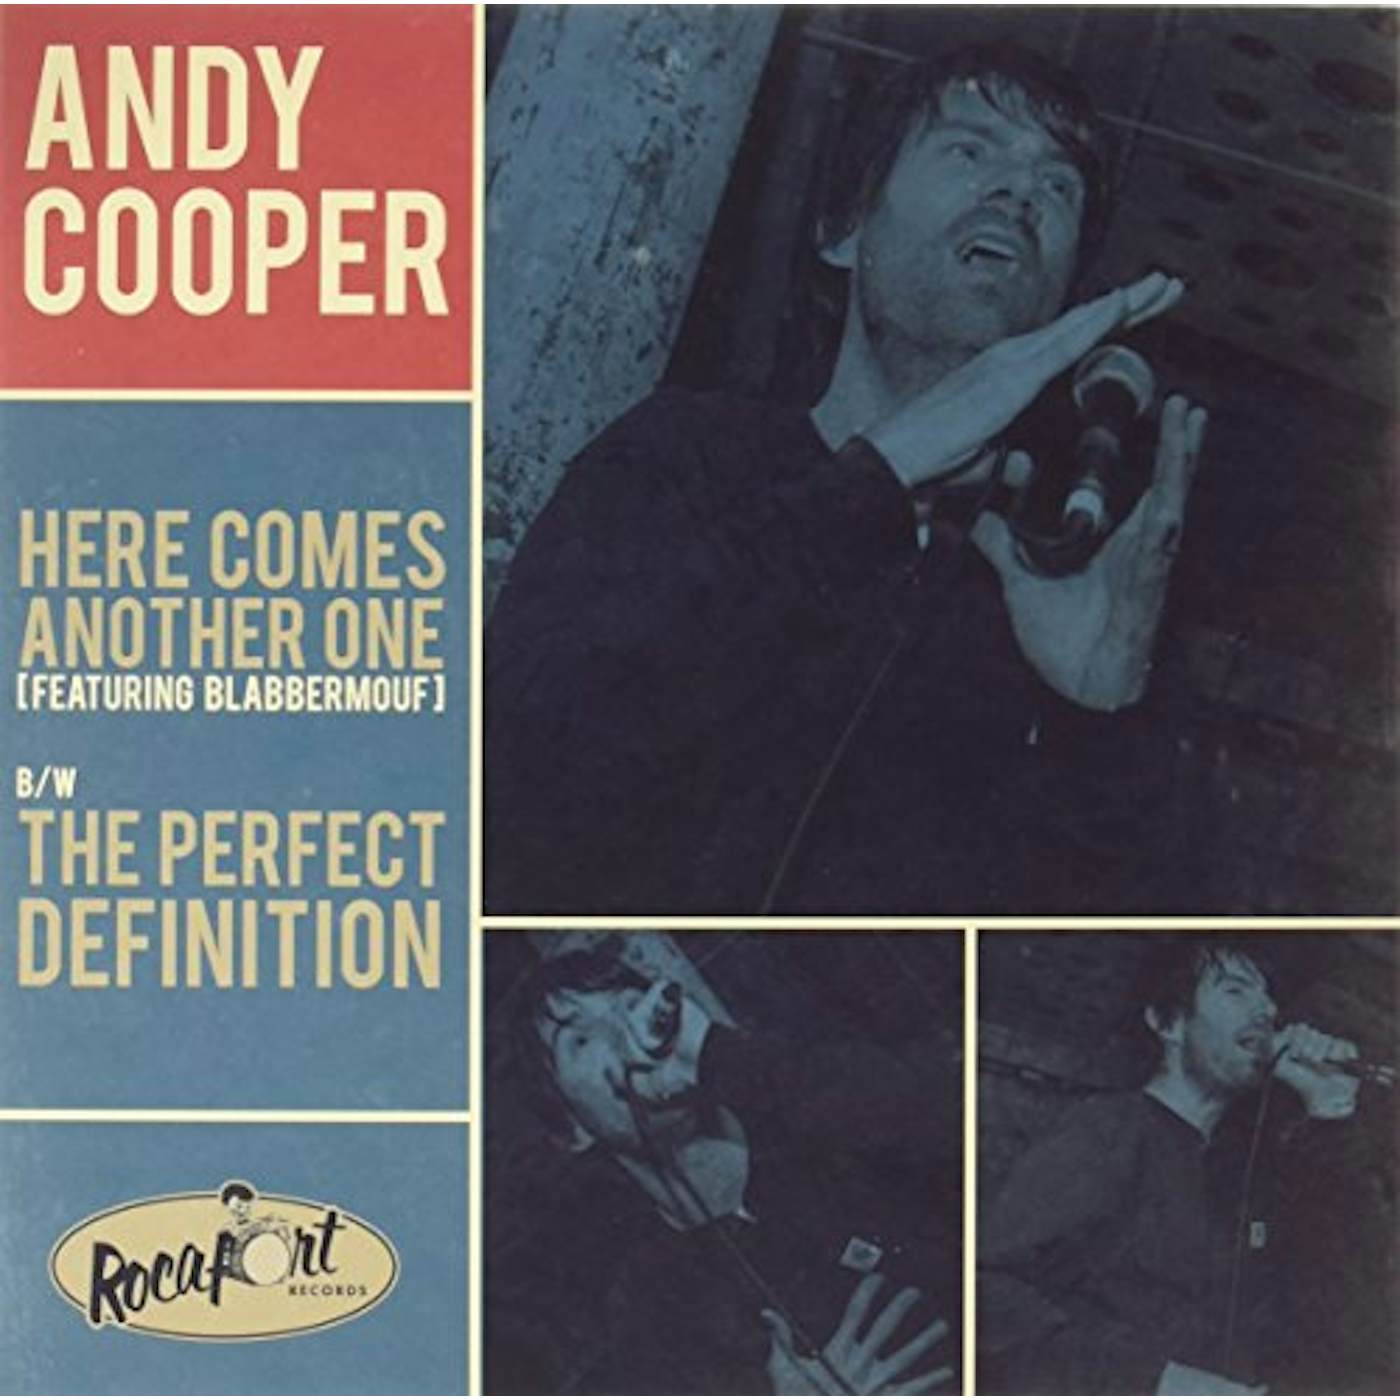 Andy Cooper HERE COMES ANOTHER ONE / PERFECT DEFINITION Vinyl Record